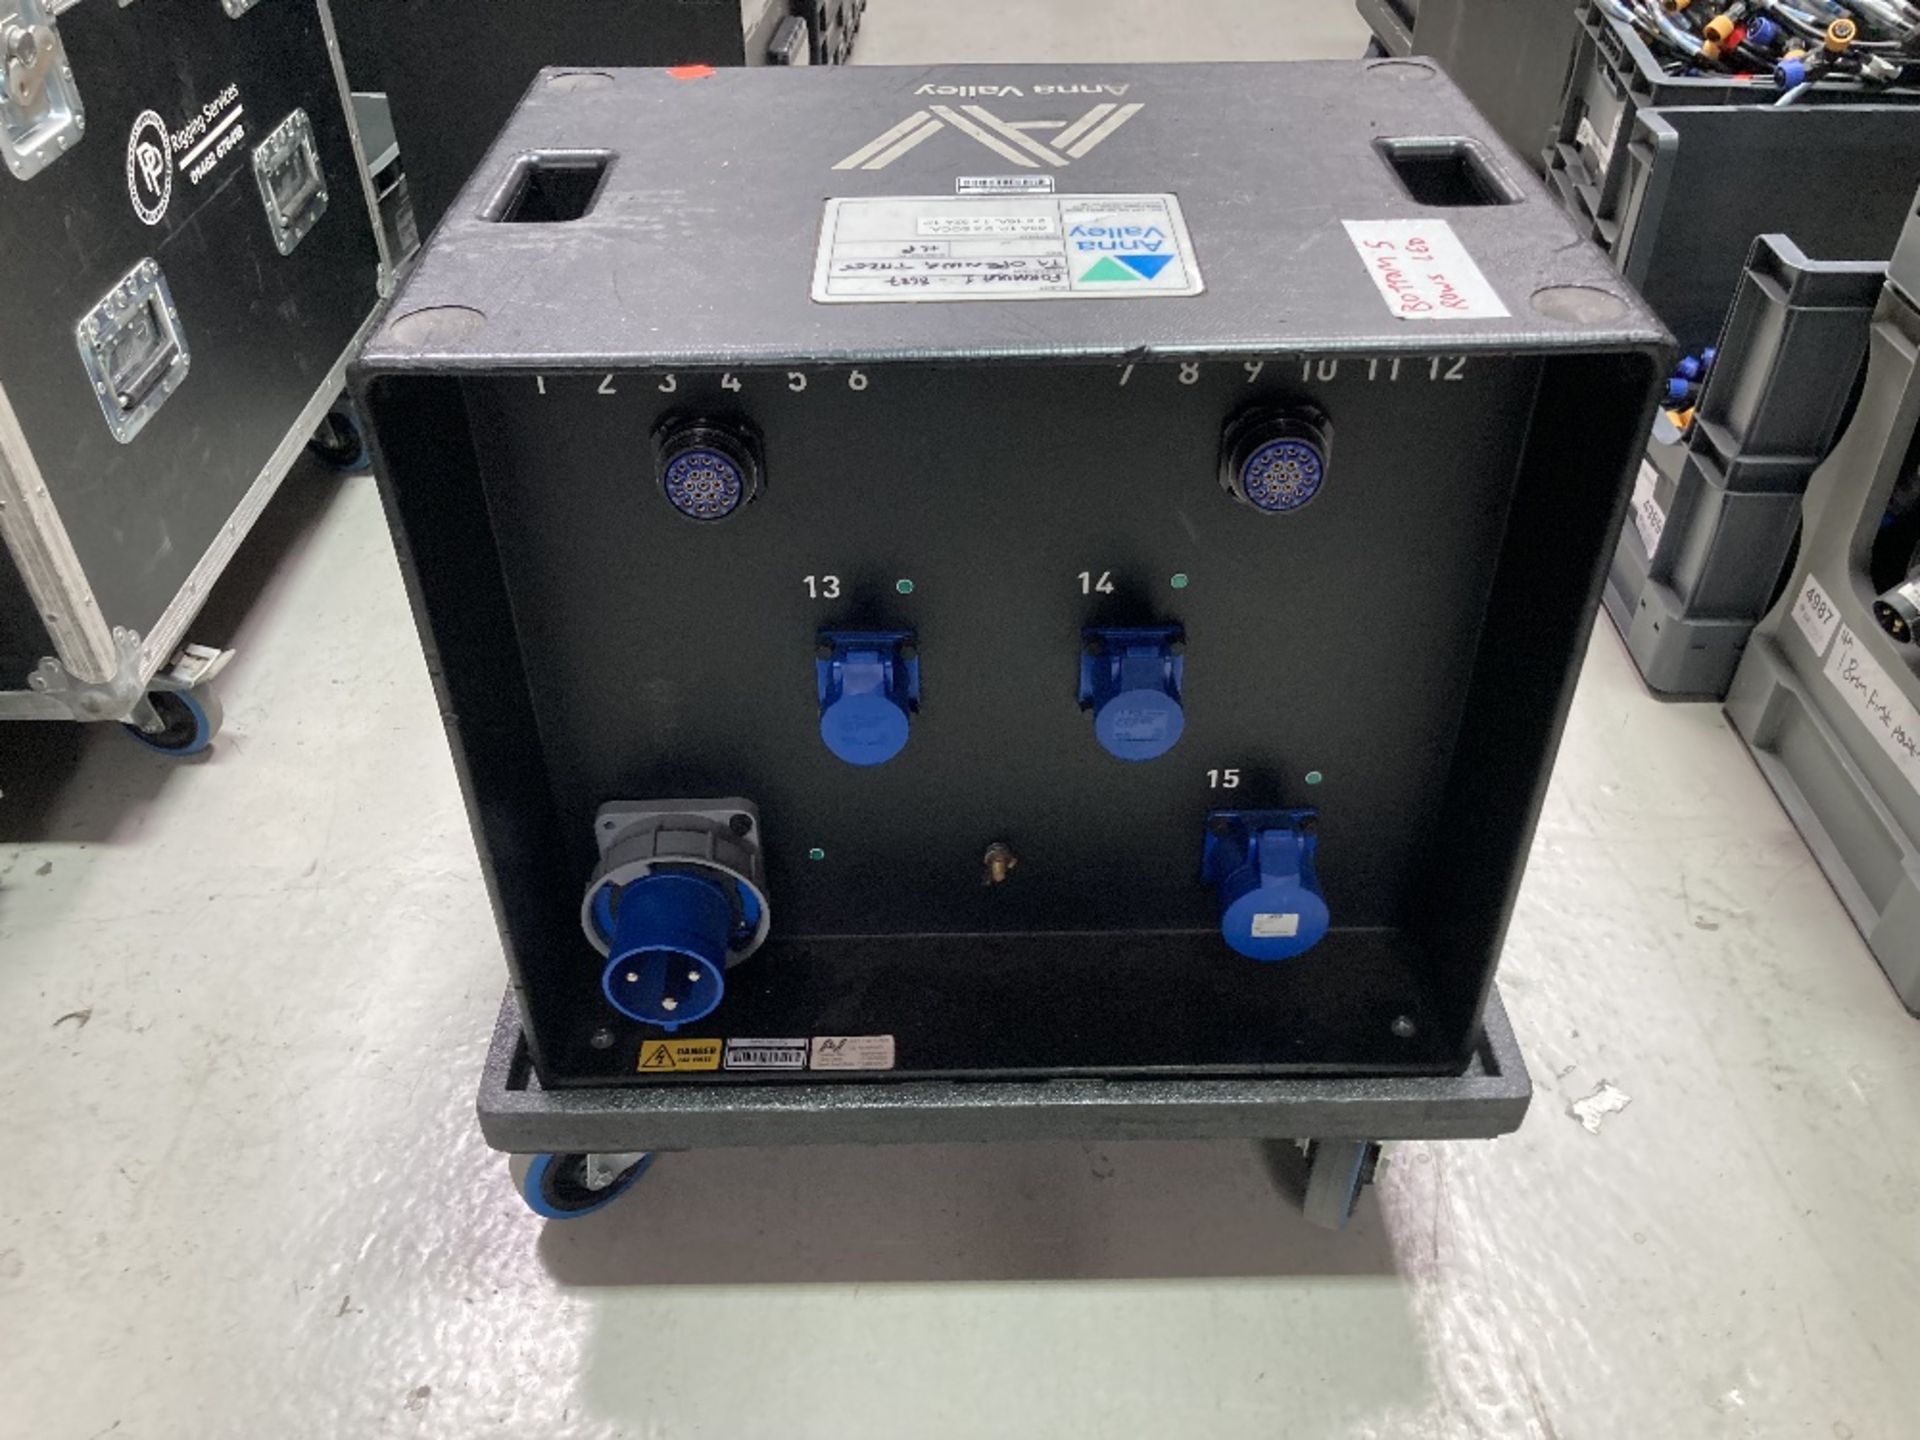 63amp Power Distribution Unit With Mobile Mountable Trolley - Image 5 of 10